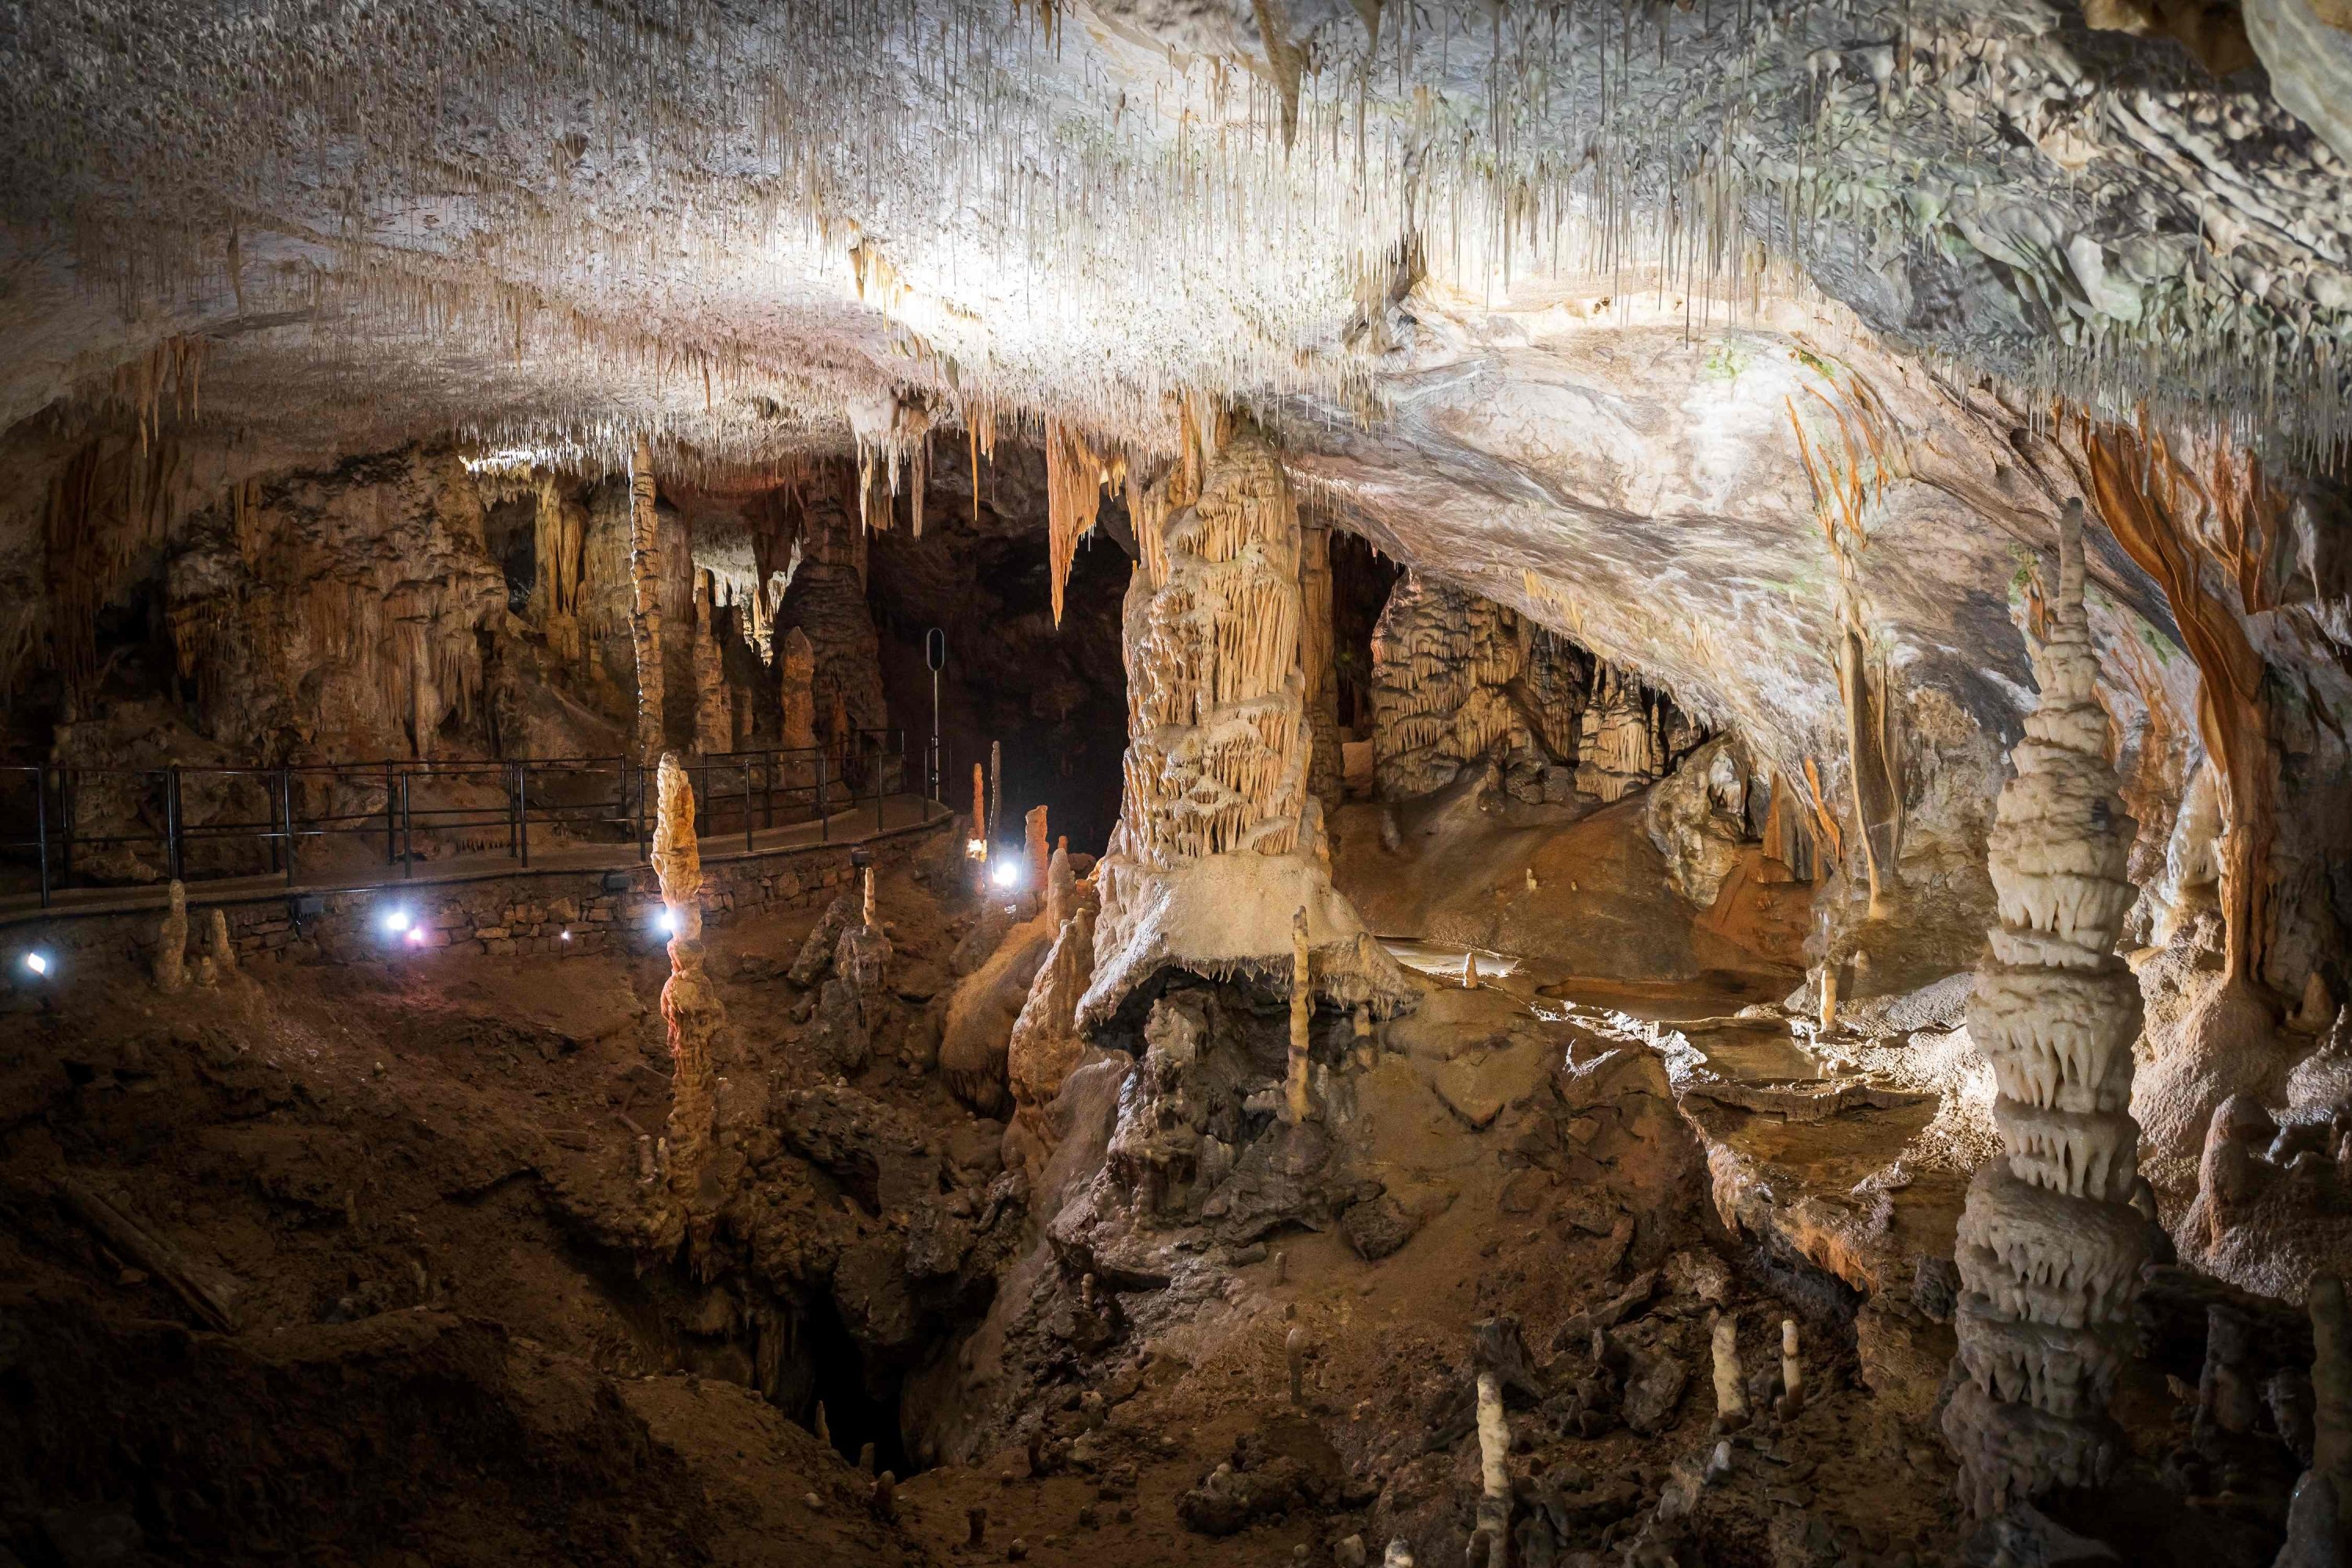 Stalagmites, stalactites and other cave formations can be seen in a part of the Postojna Cave in Postojna, Slovenia, May 25, 2021. (AFP Photo)